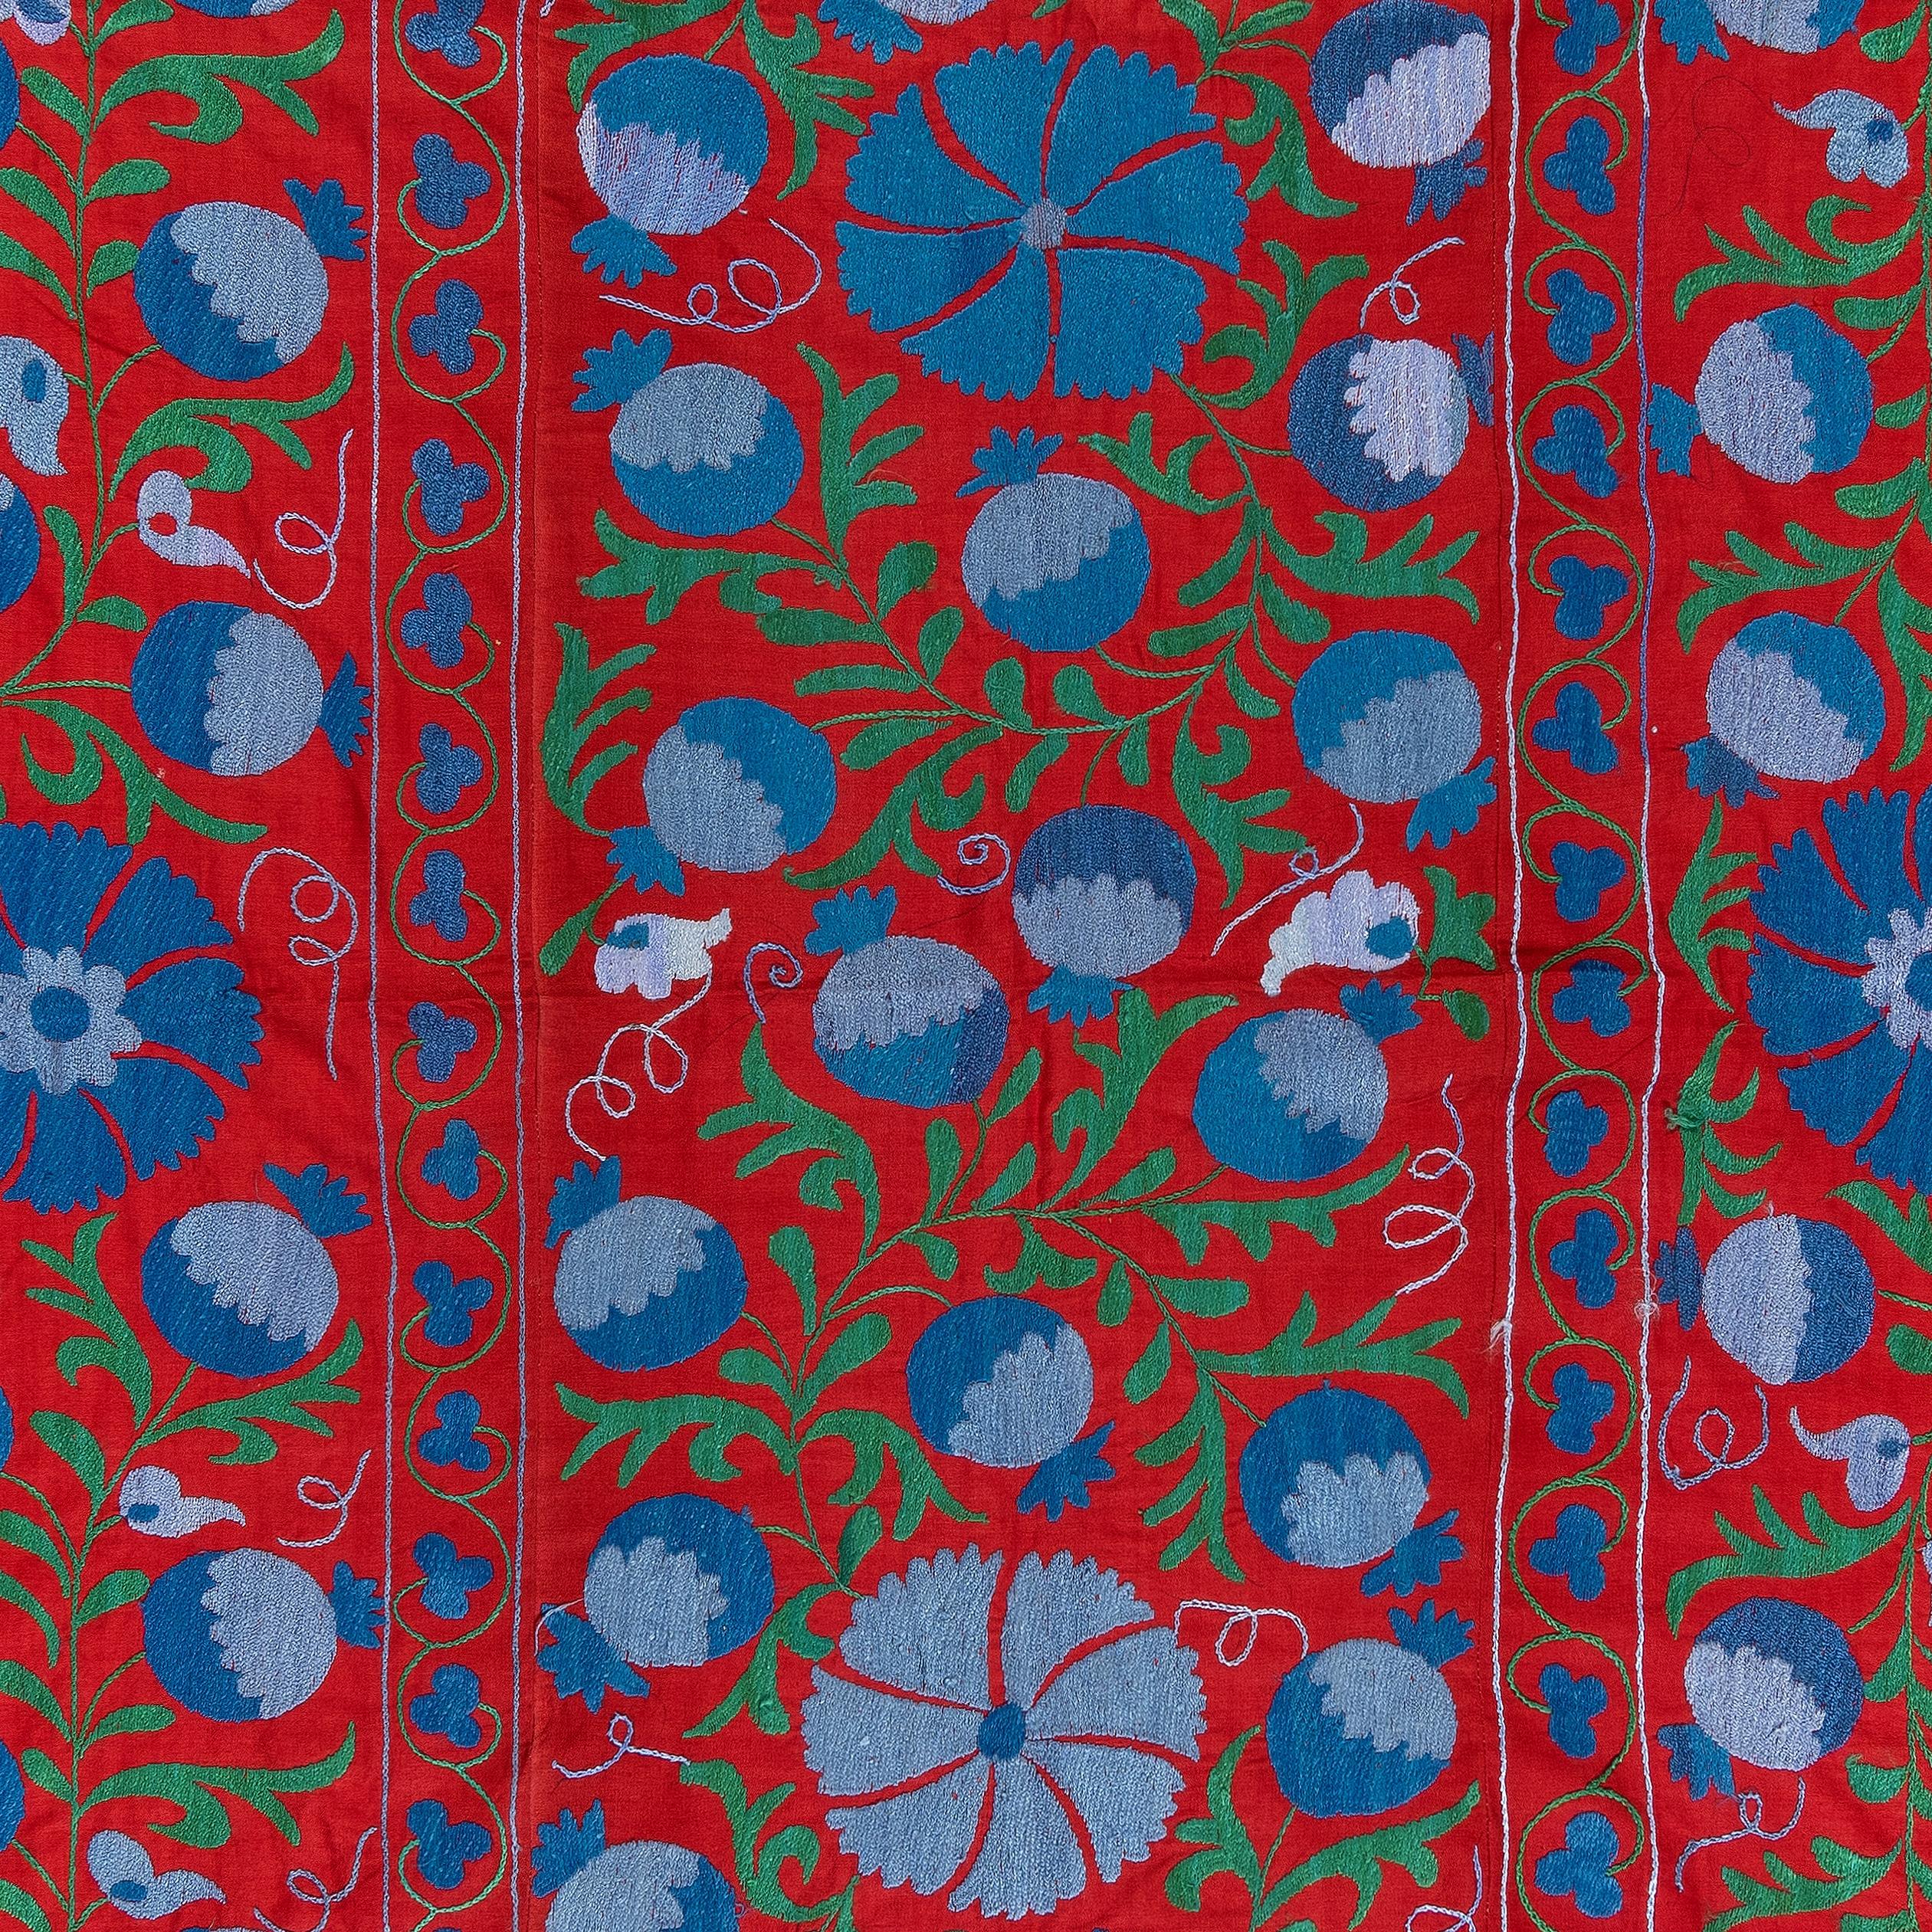 Uzbek 4.5x7 Ft Magnificent Silk Embroidery Suzani Wall Hanging in Red, Blue and Green For Sale